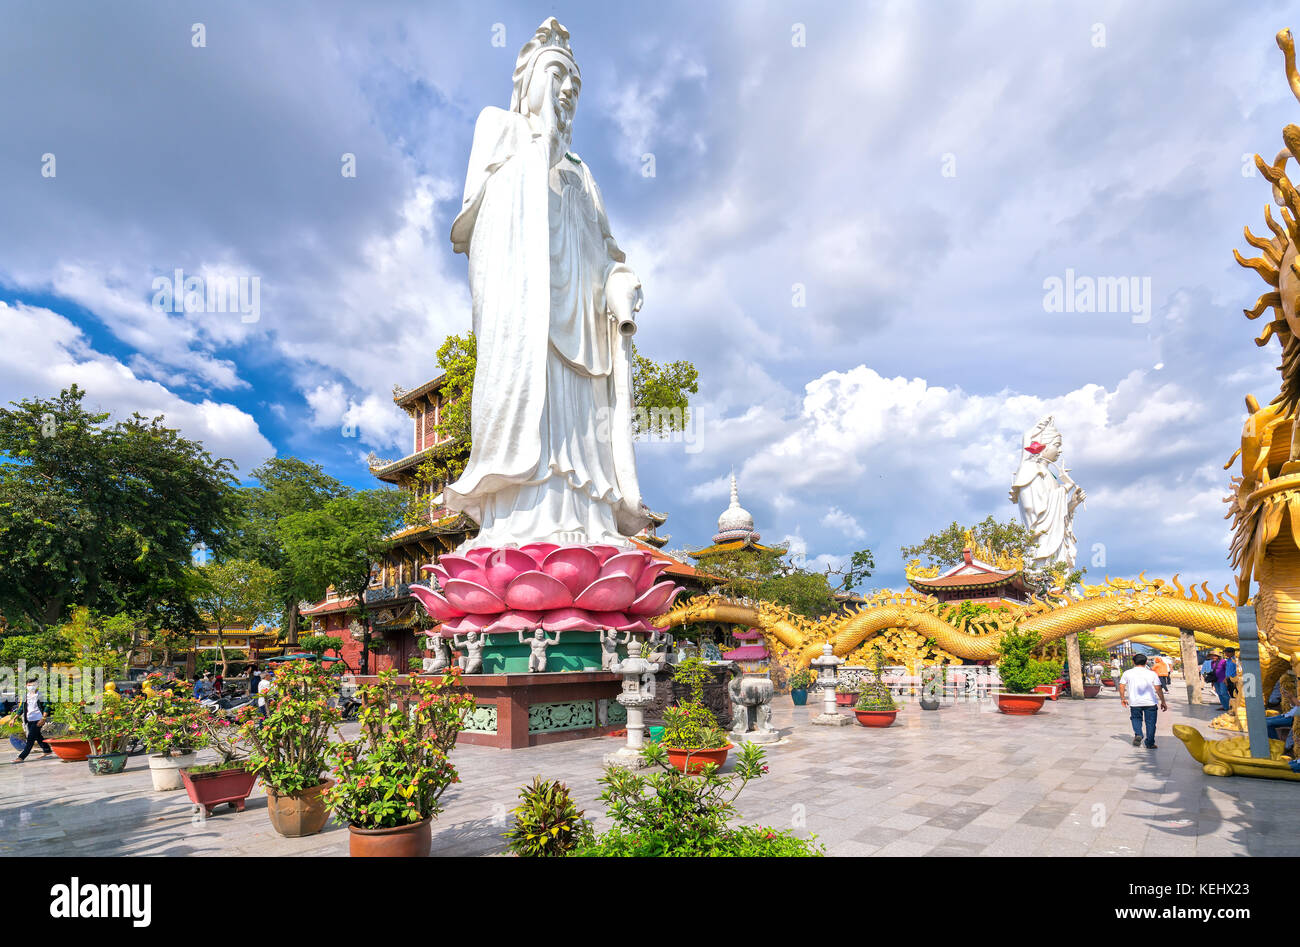 Buddhist statue in temple decorated  beautiful depicting religious spiritual culture. Stock Photo